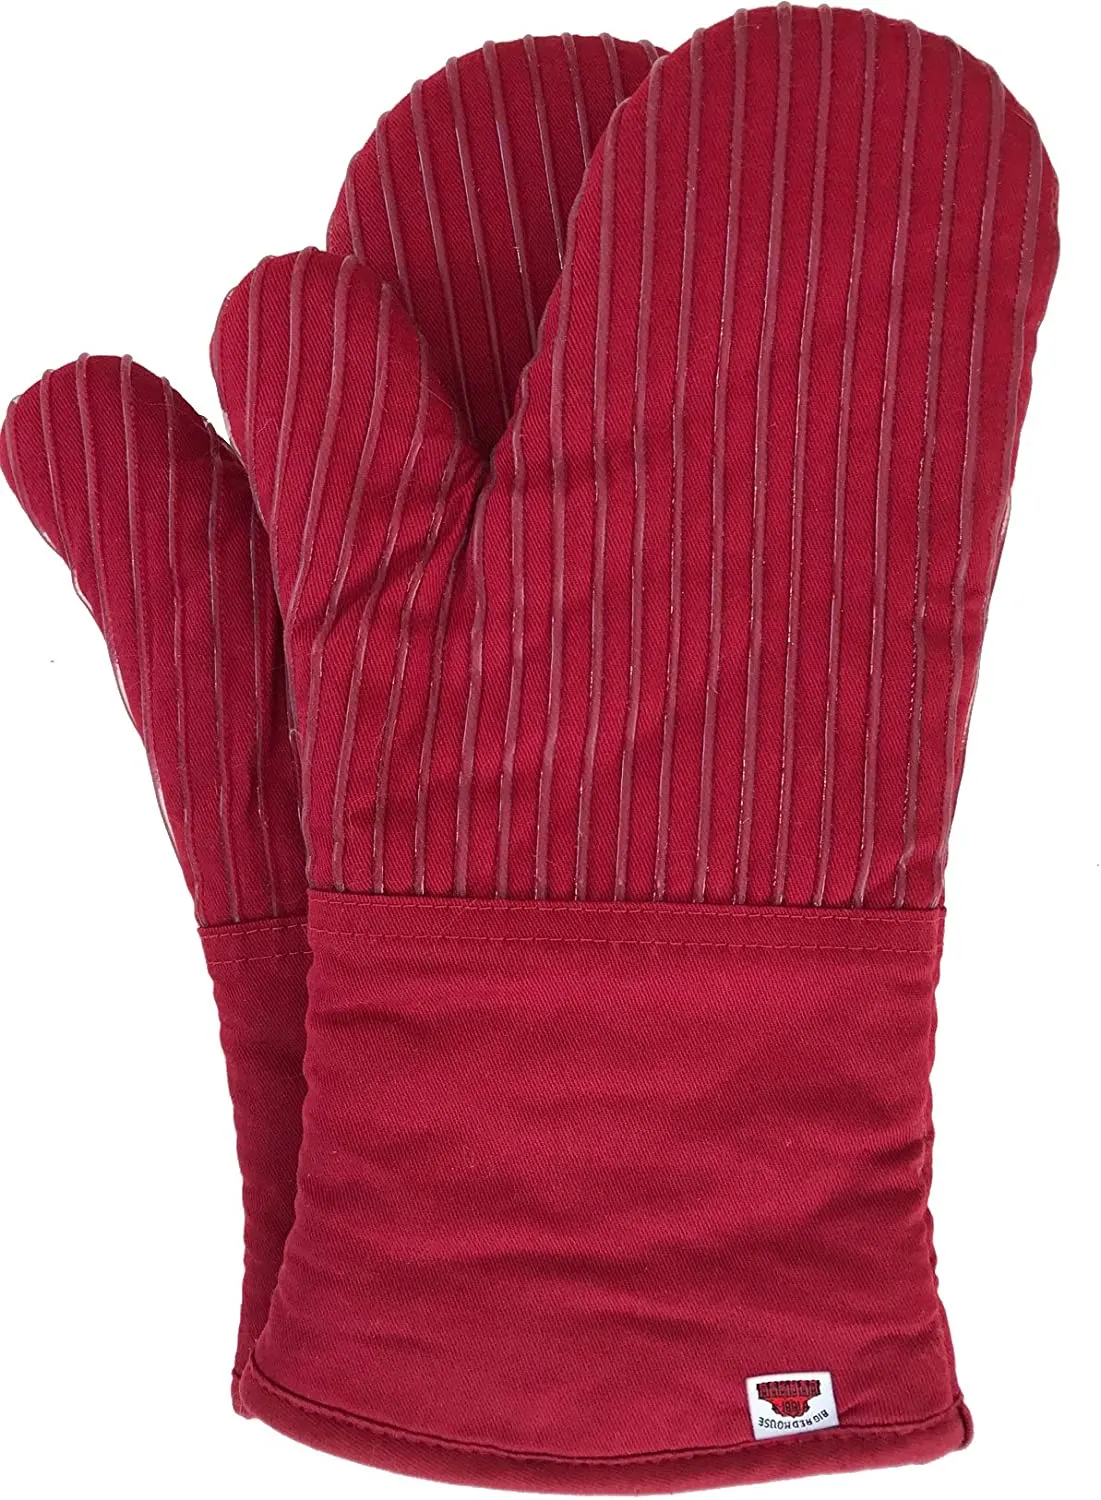 Oven Mitts, with The Heat Resistance of Silicone and Flexibility of Cotton